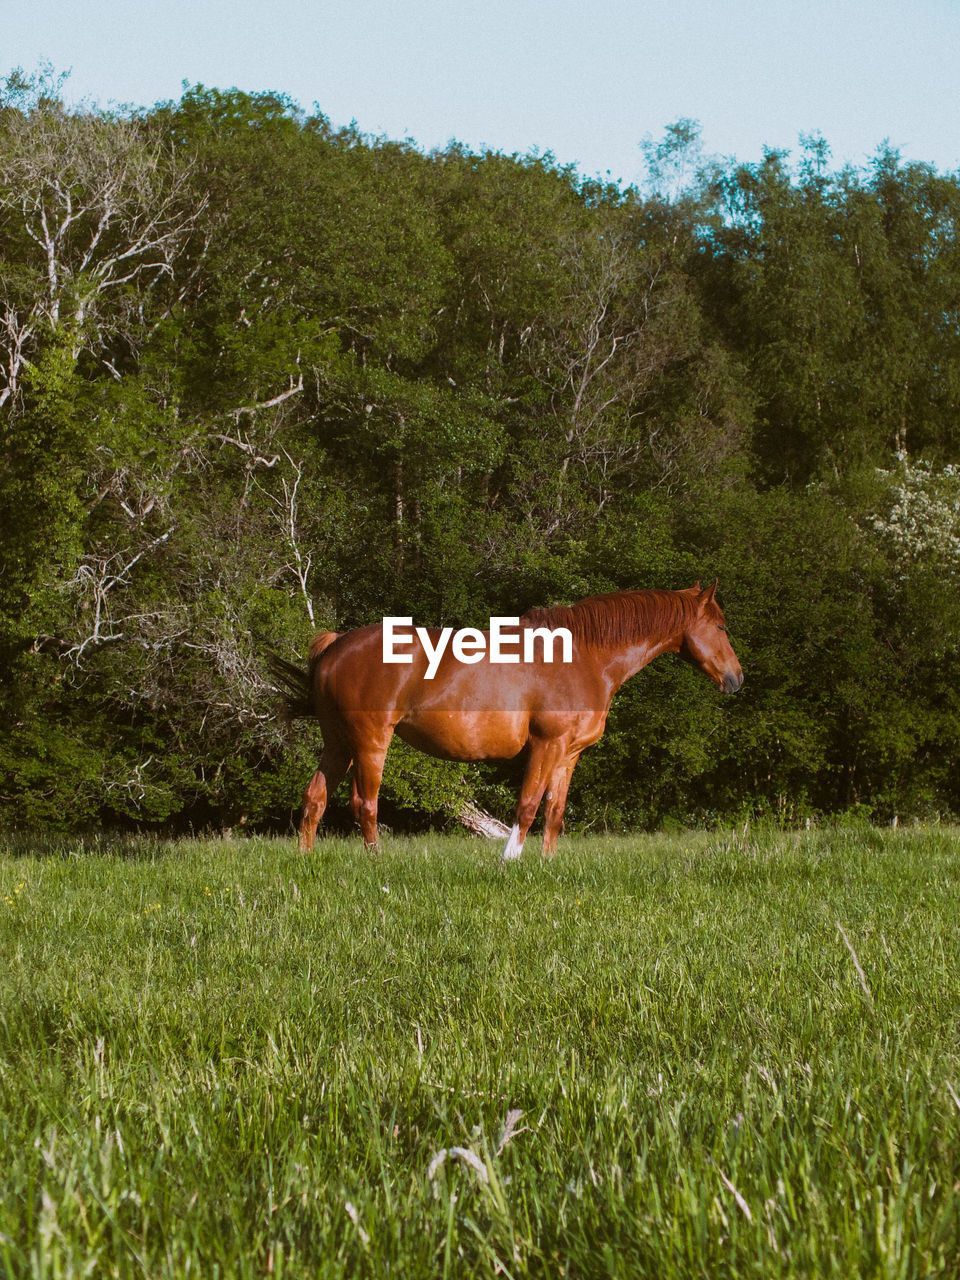 side view of horse standing on grassy field